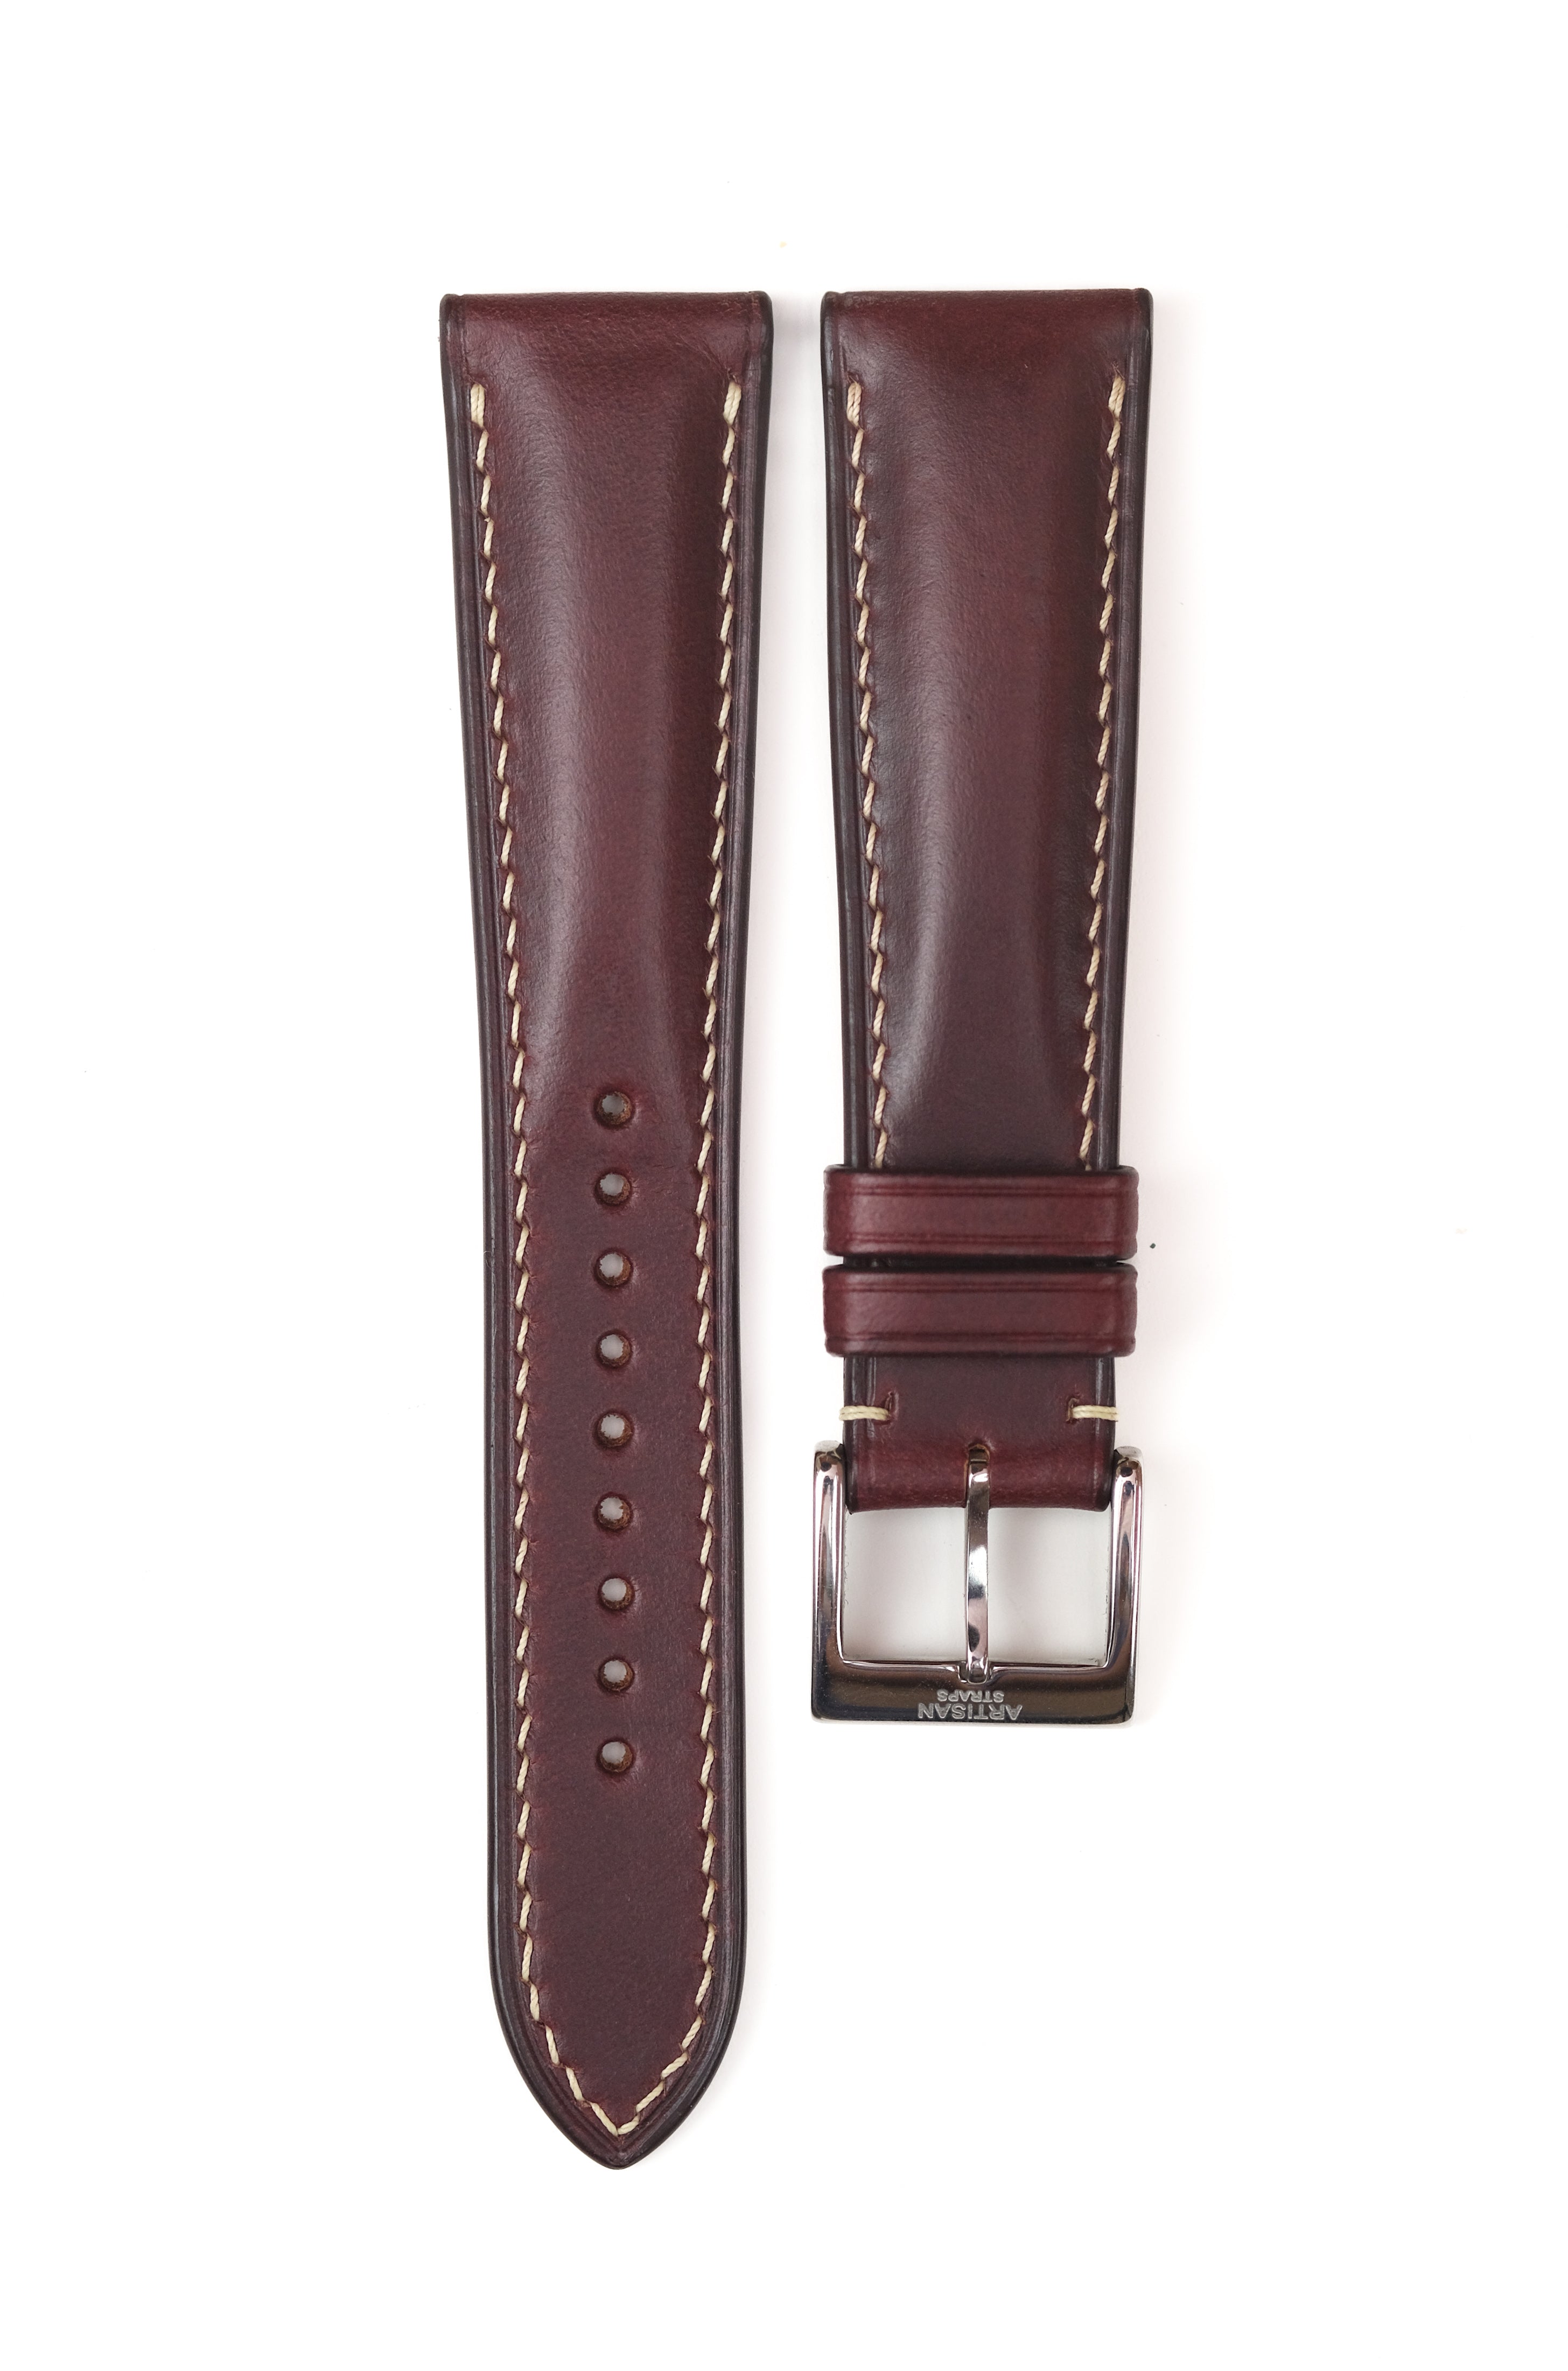 Colour #8 Horween Chromexcel (Padded) Leather Strap - Artisan Straps